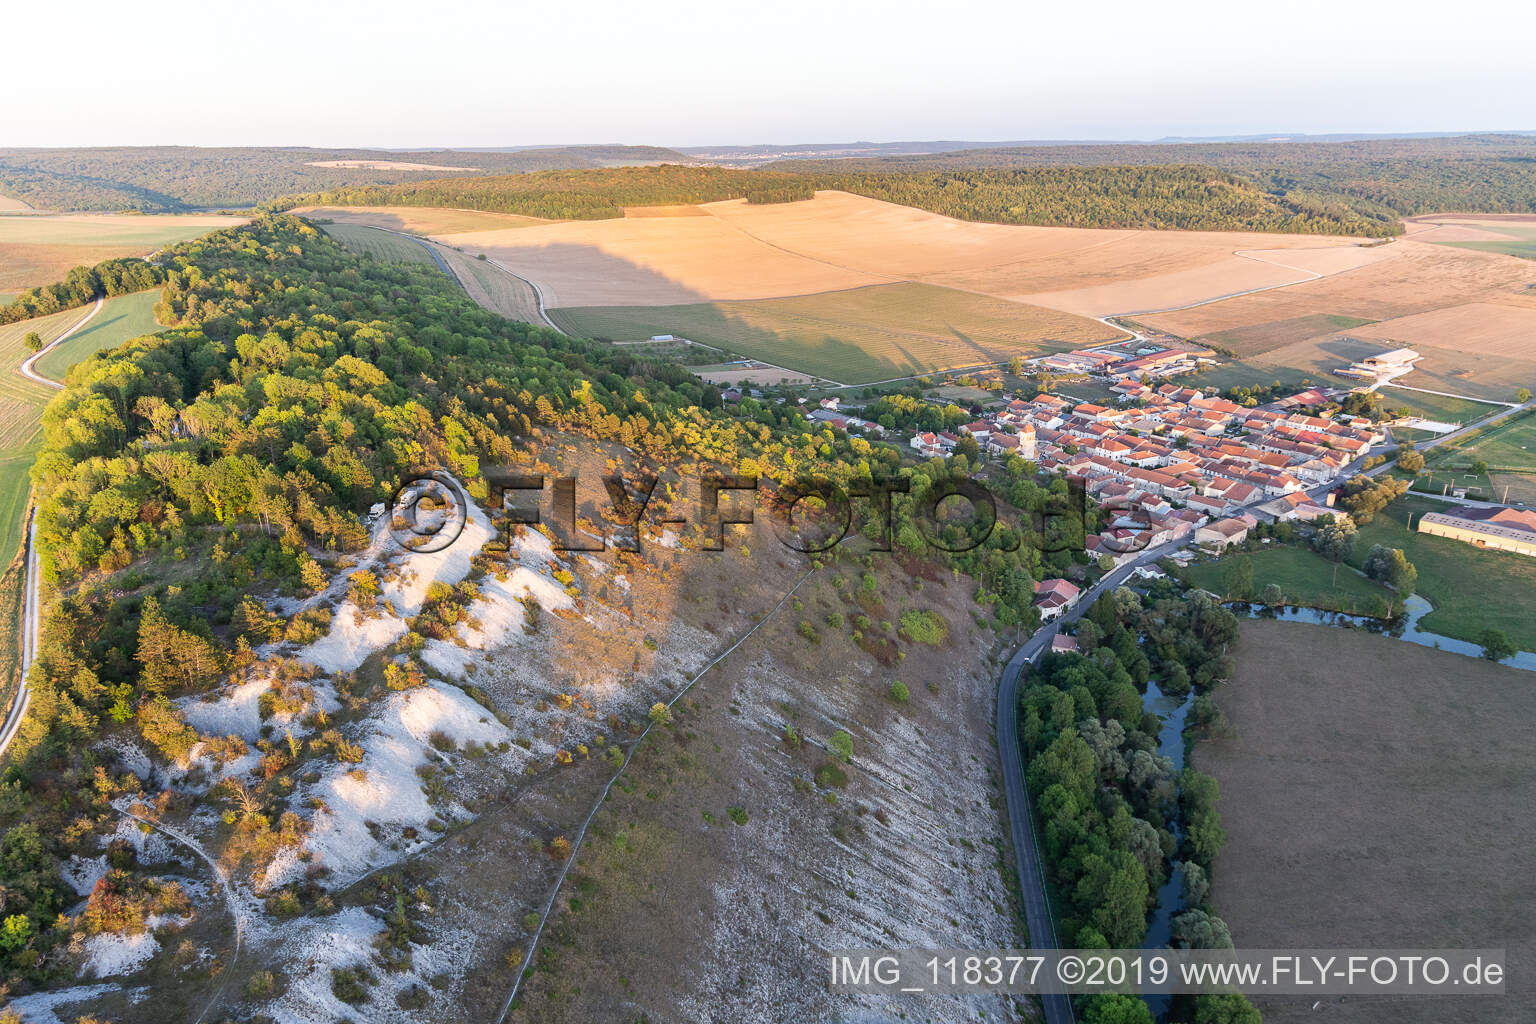 Oblique view of Paragliding launch sites above the Chètre in Champougny in the state Meuse, France